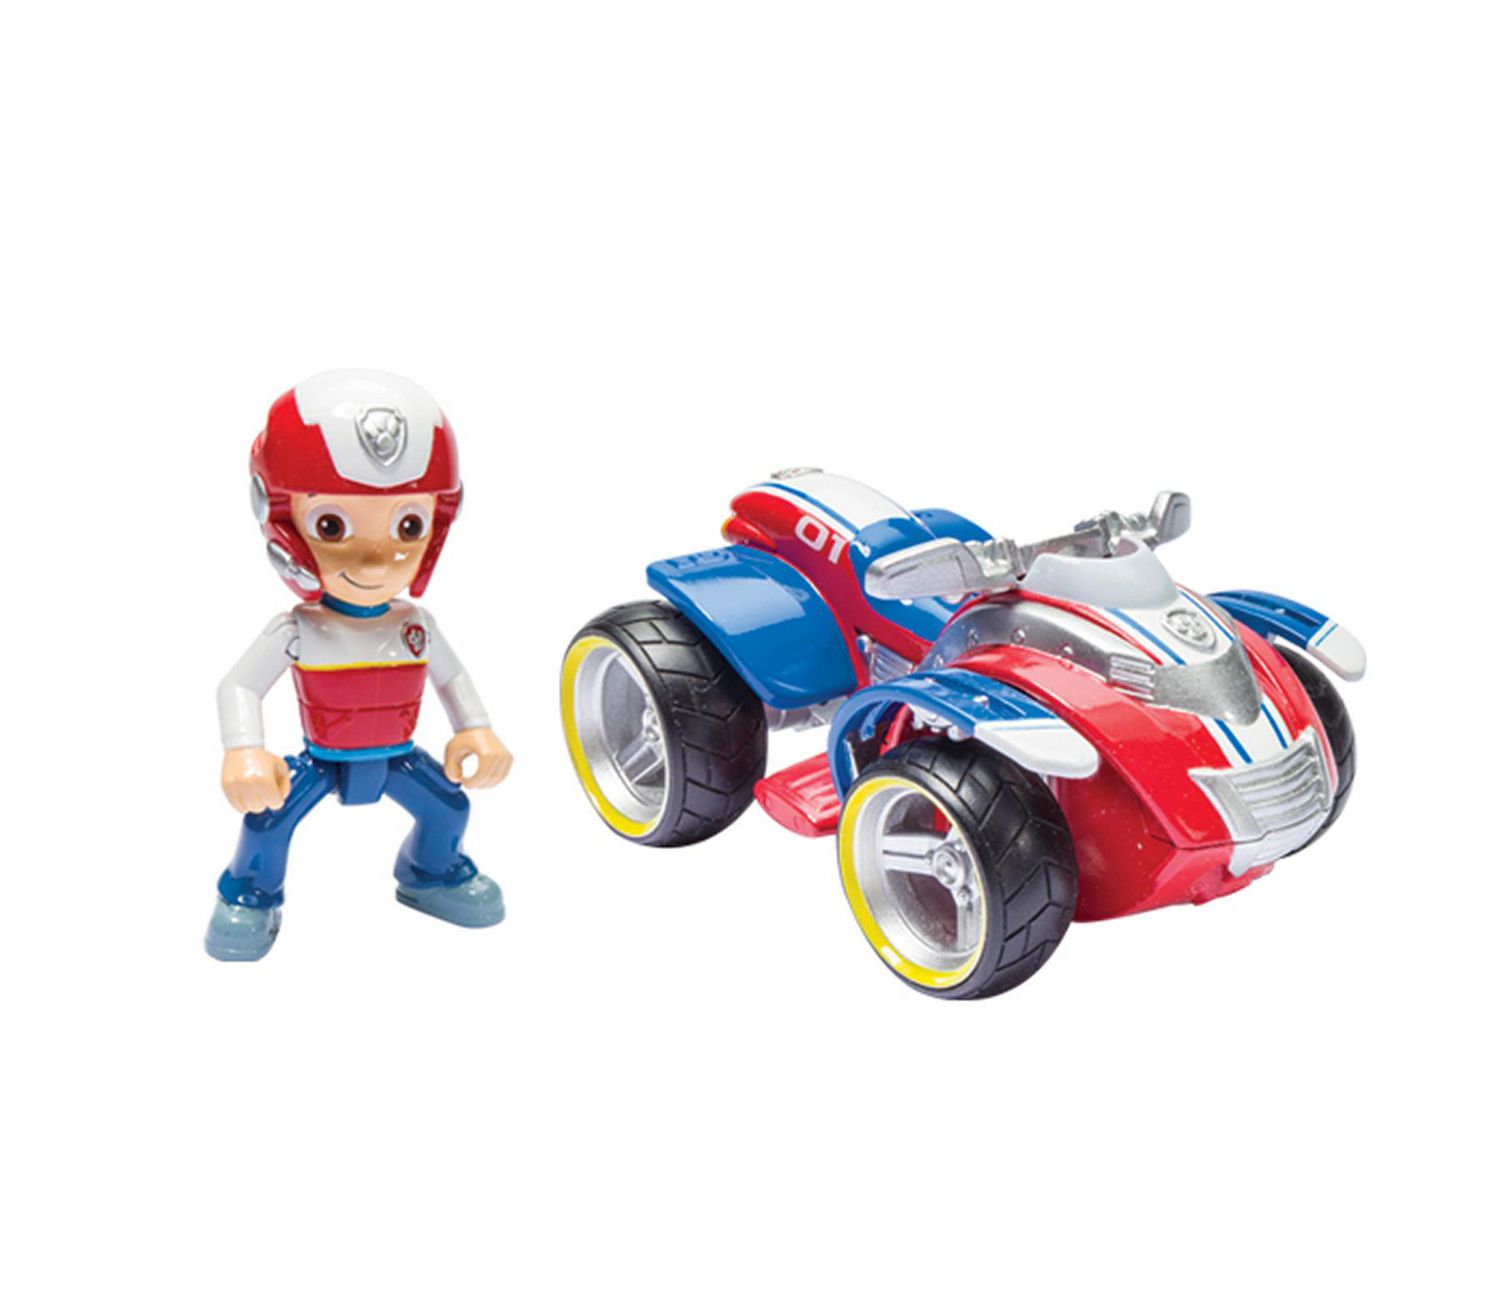 Paw Patrol Ryders Rescue Atv Toy Vehicle With Action Figure Walmart